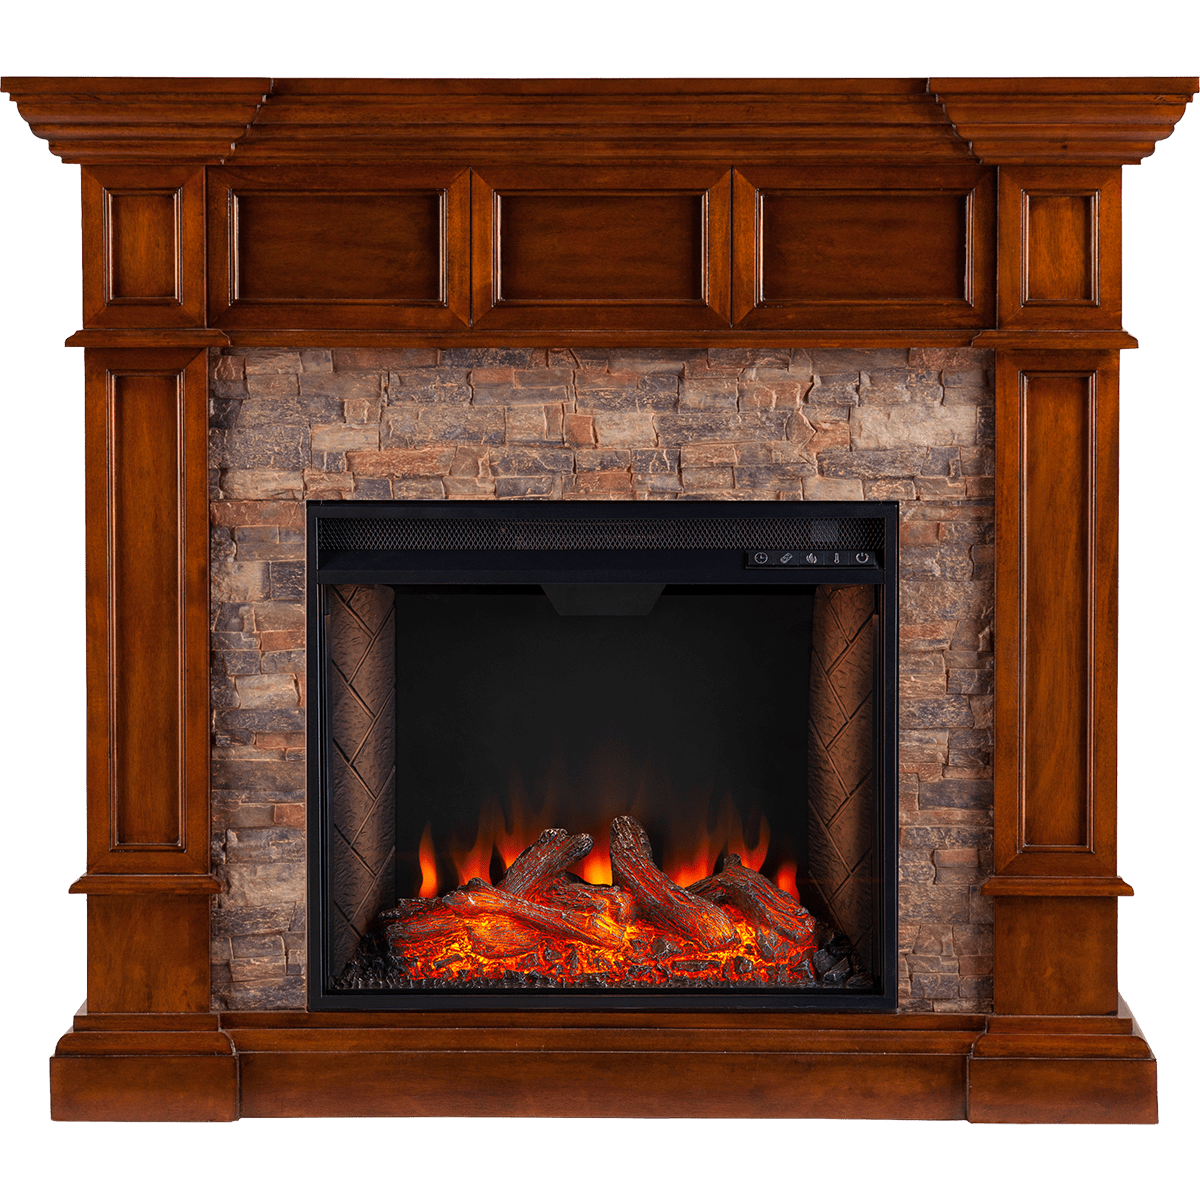 Baby Proof Fireplace Cover Unique southern Enterprises Merrimack Simulated Stone Convertible Electric Fireplace